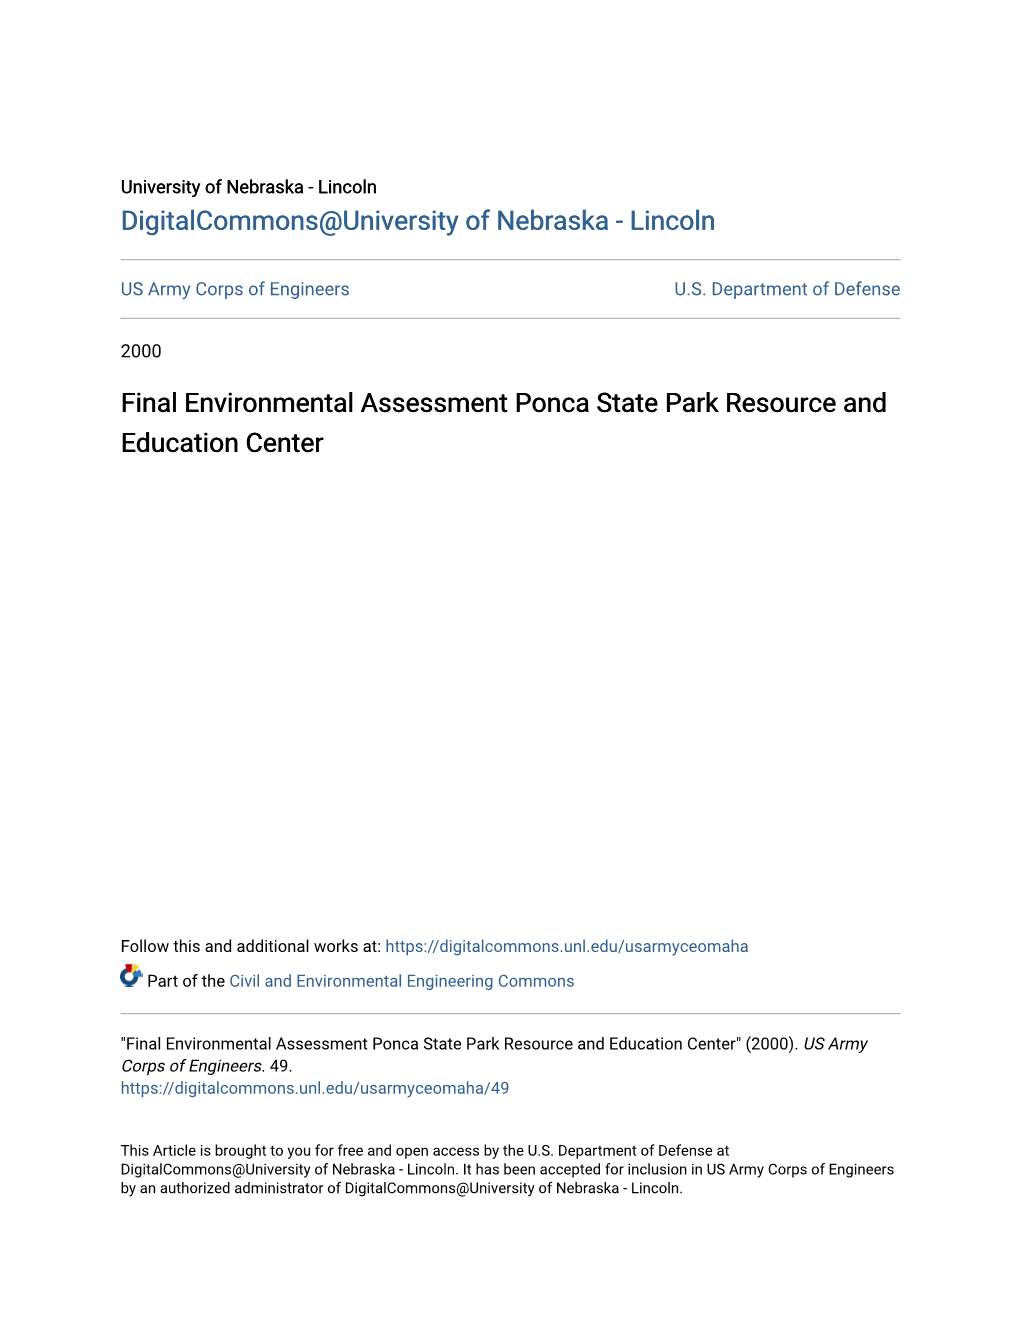 Final Environmental Assessment Ponca State Park Resource and Education Center